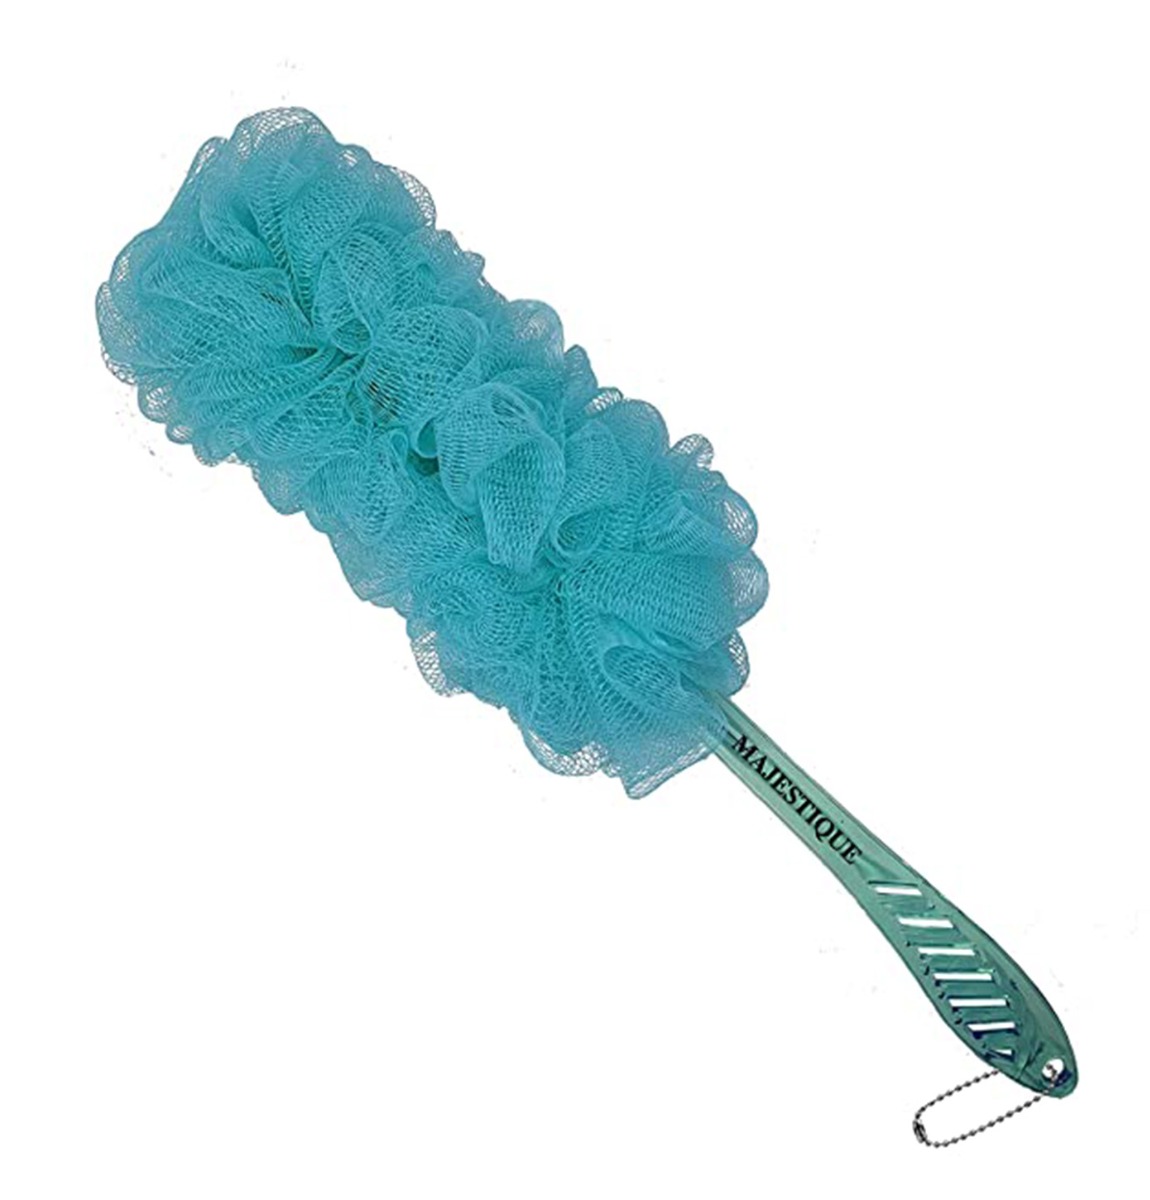 Majestique Back Scrubber For Shower Loofah Long Handle Bath Body Brush For Men And Women - Assorted, 1pc